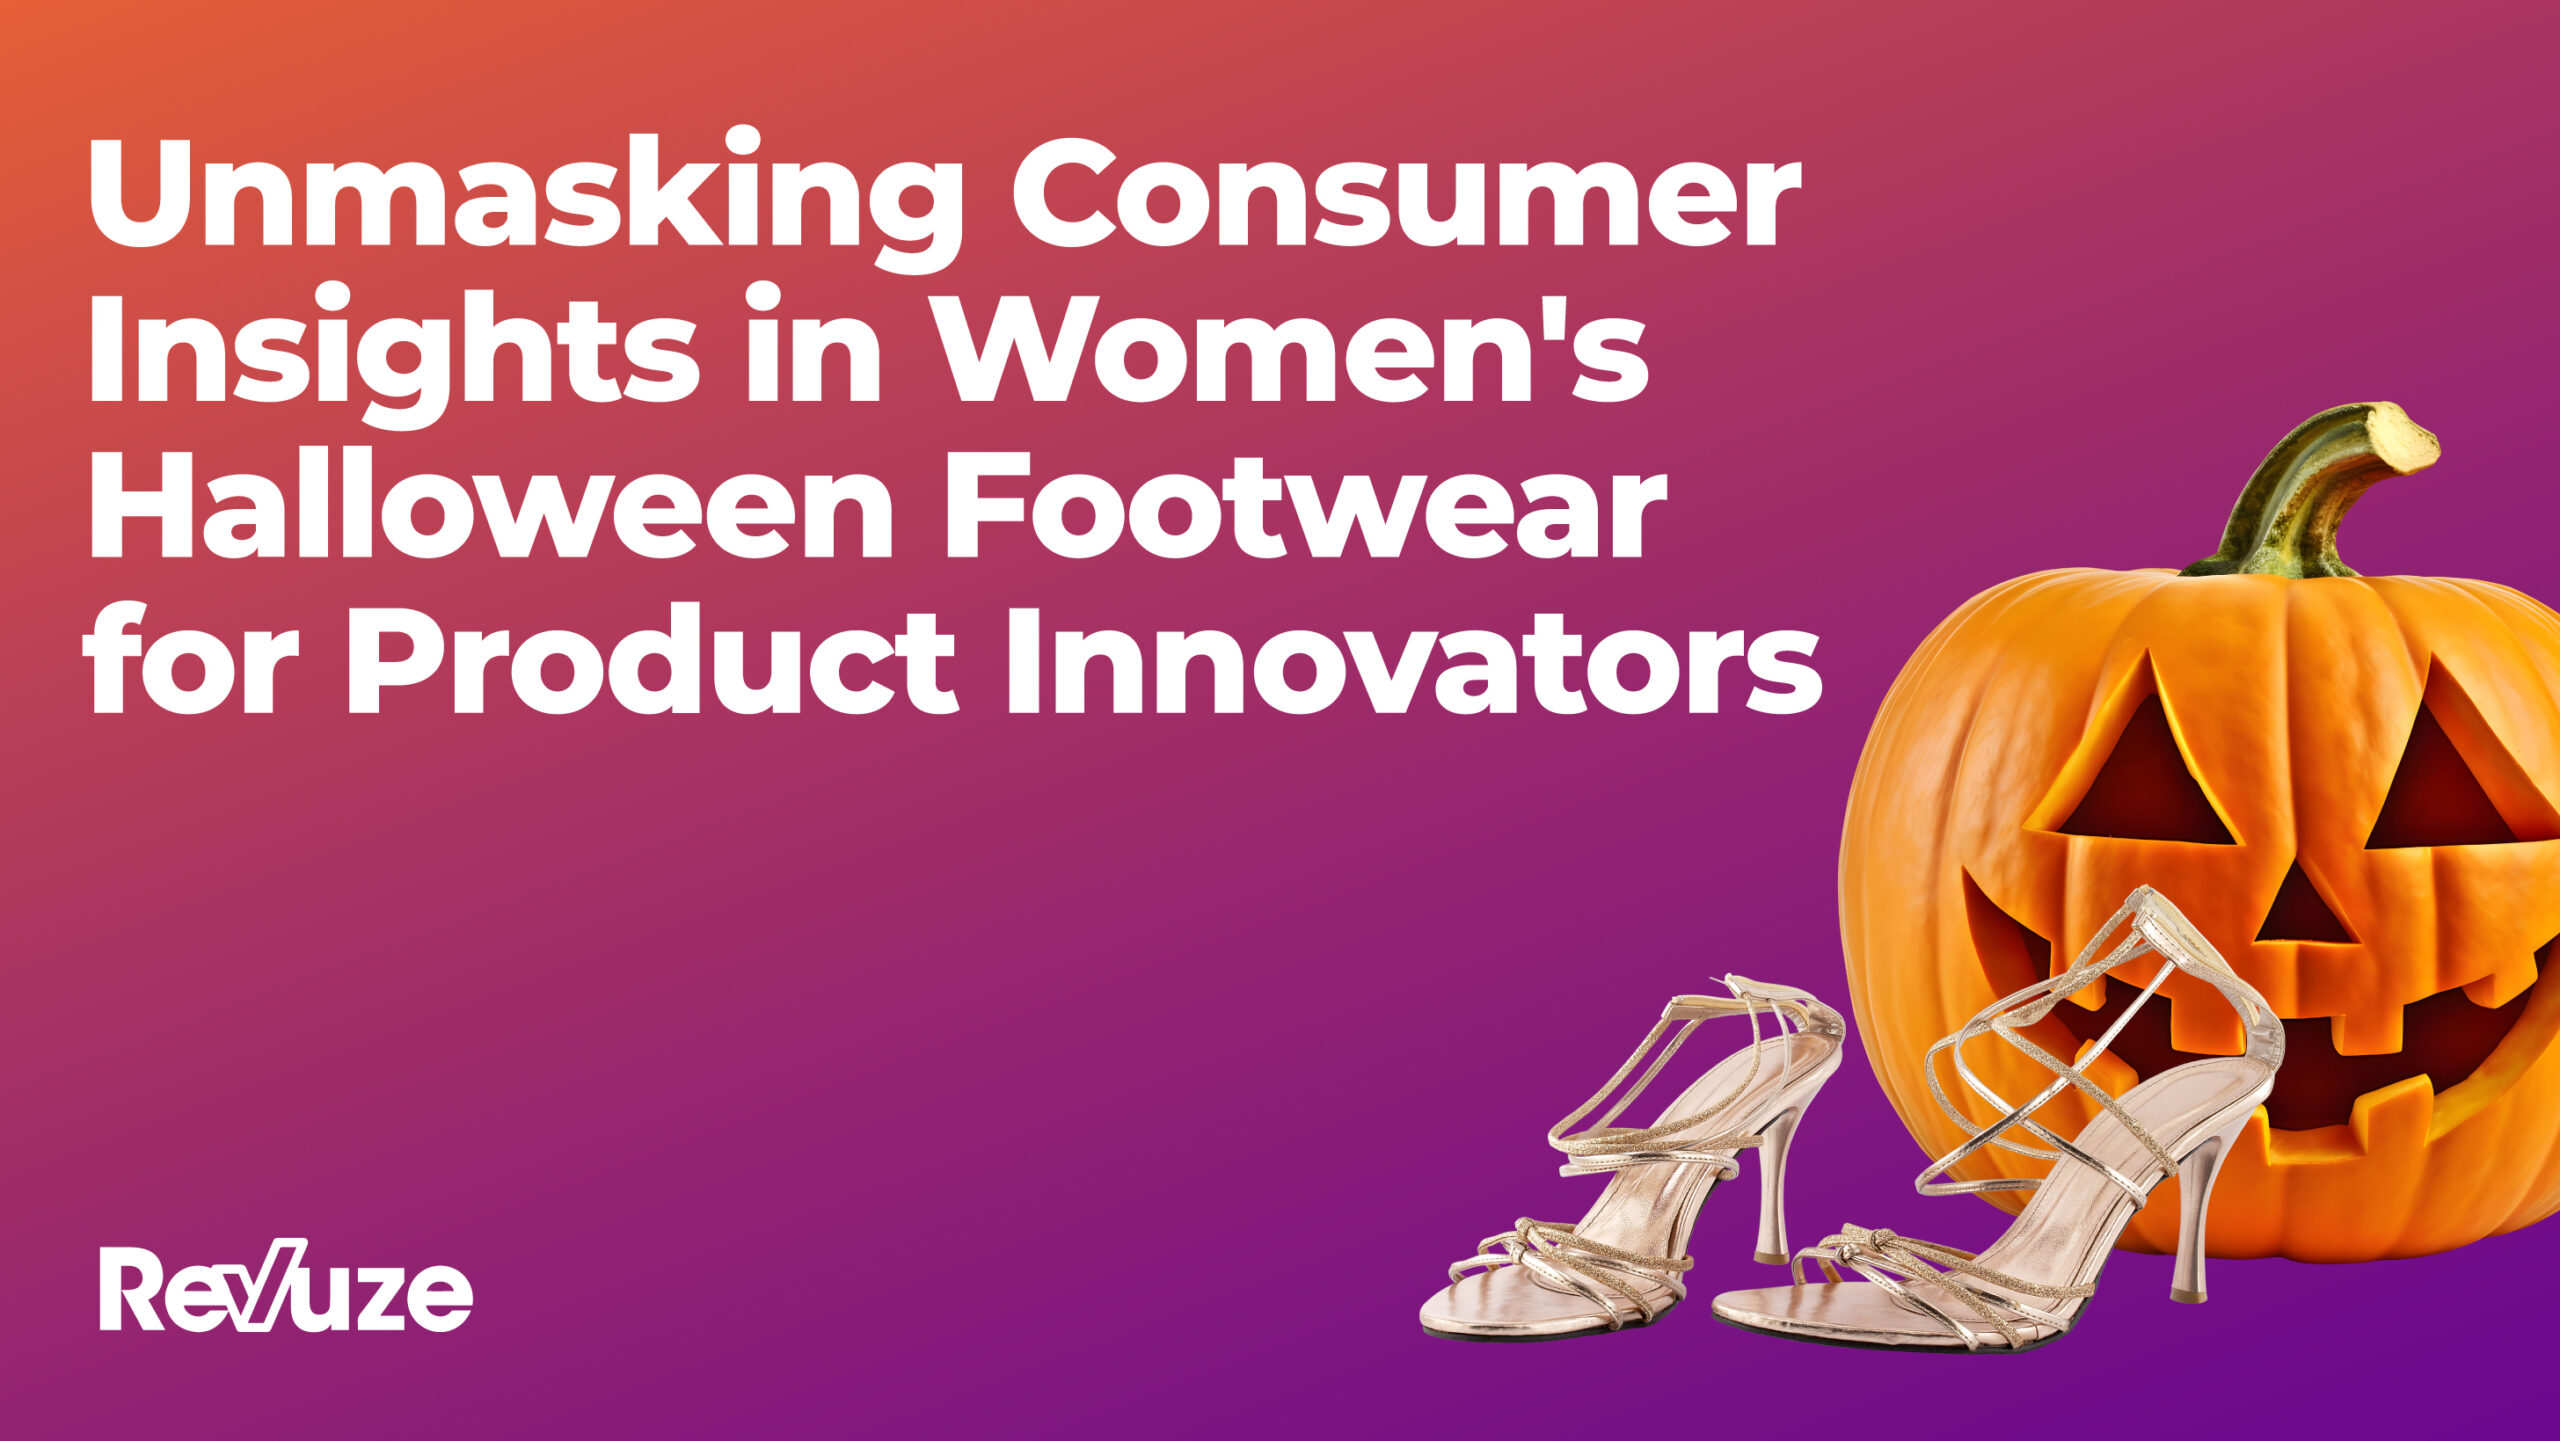 Unmasking Consumer Insights in Women’s Halloween Footwear for Product Innovators